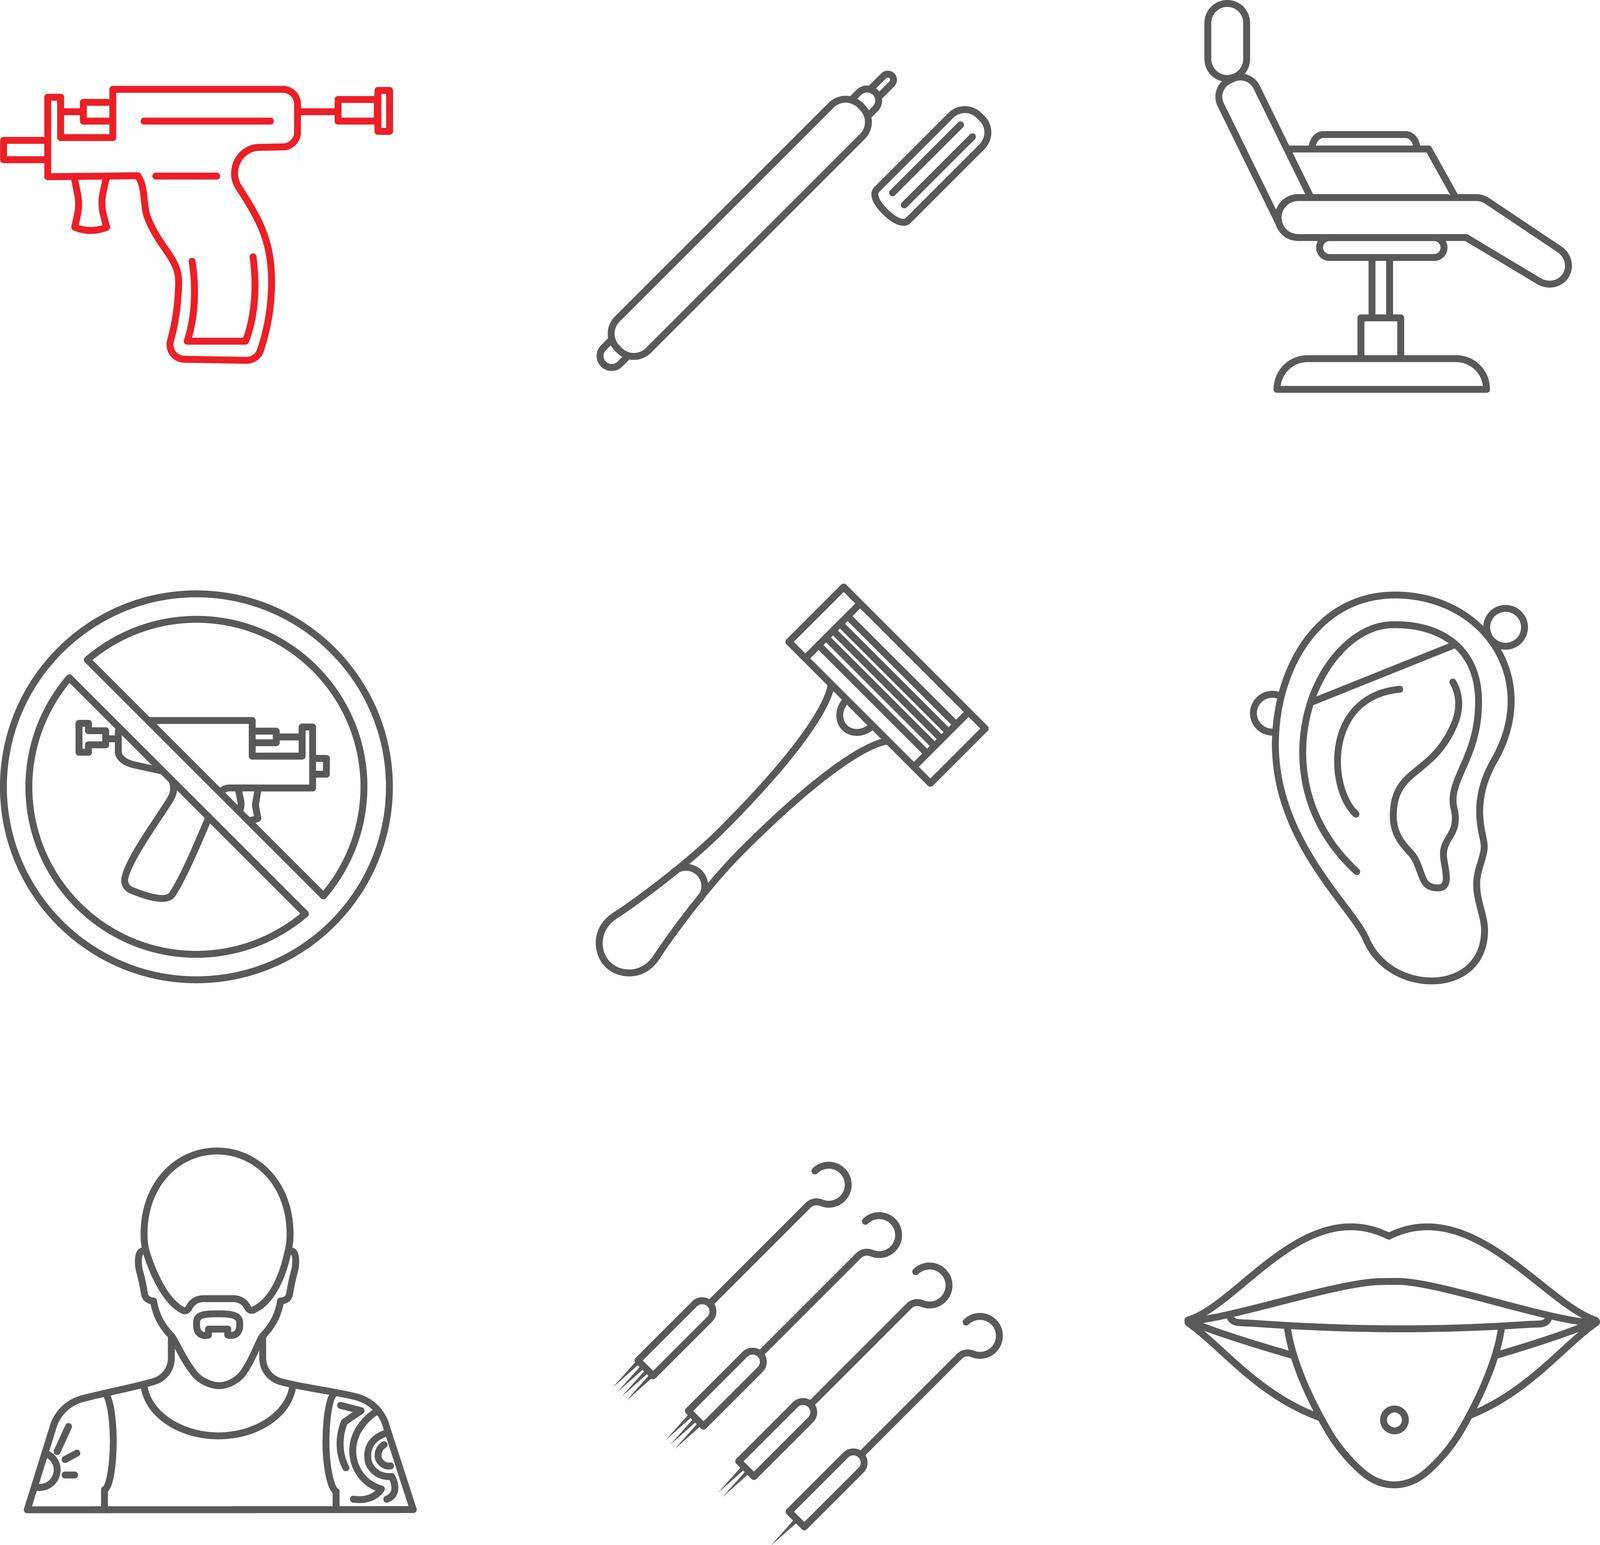 Tattoo studio linear icons set. Highlighter, tattoo chair, piercing gun prohibition, razor, pierced ear and tongue, tattooist, needles. Thin line contour symbols. Isolated vector outline illustrations